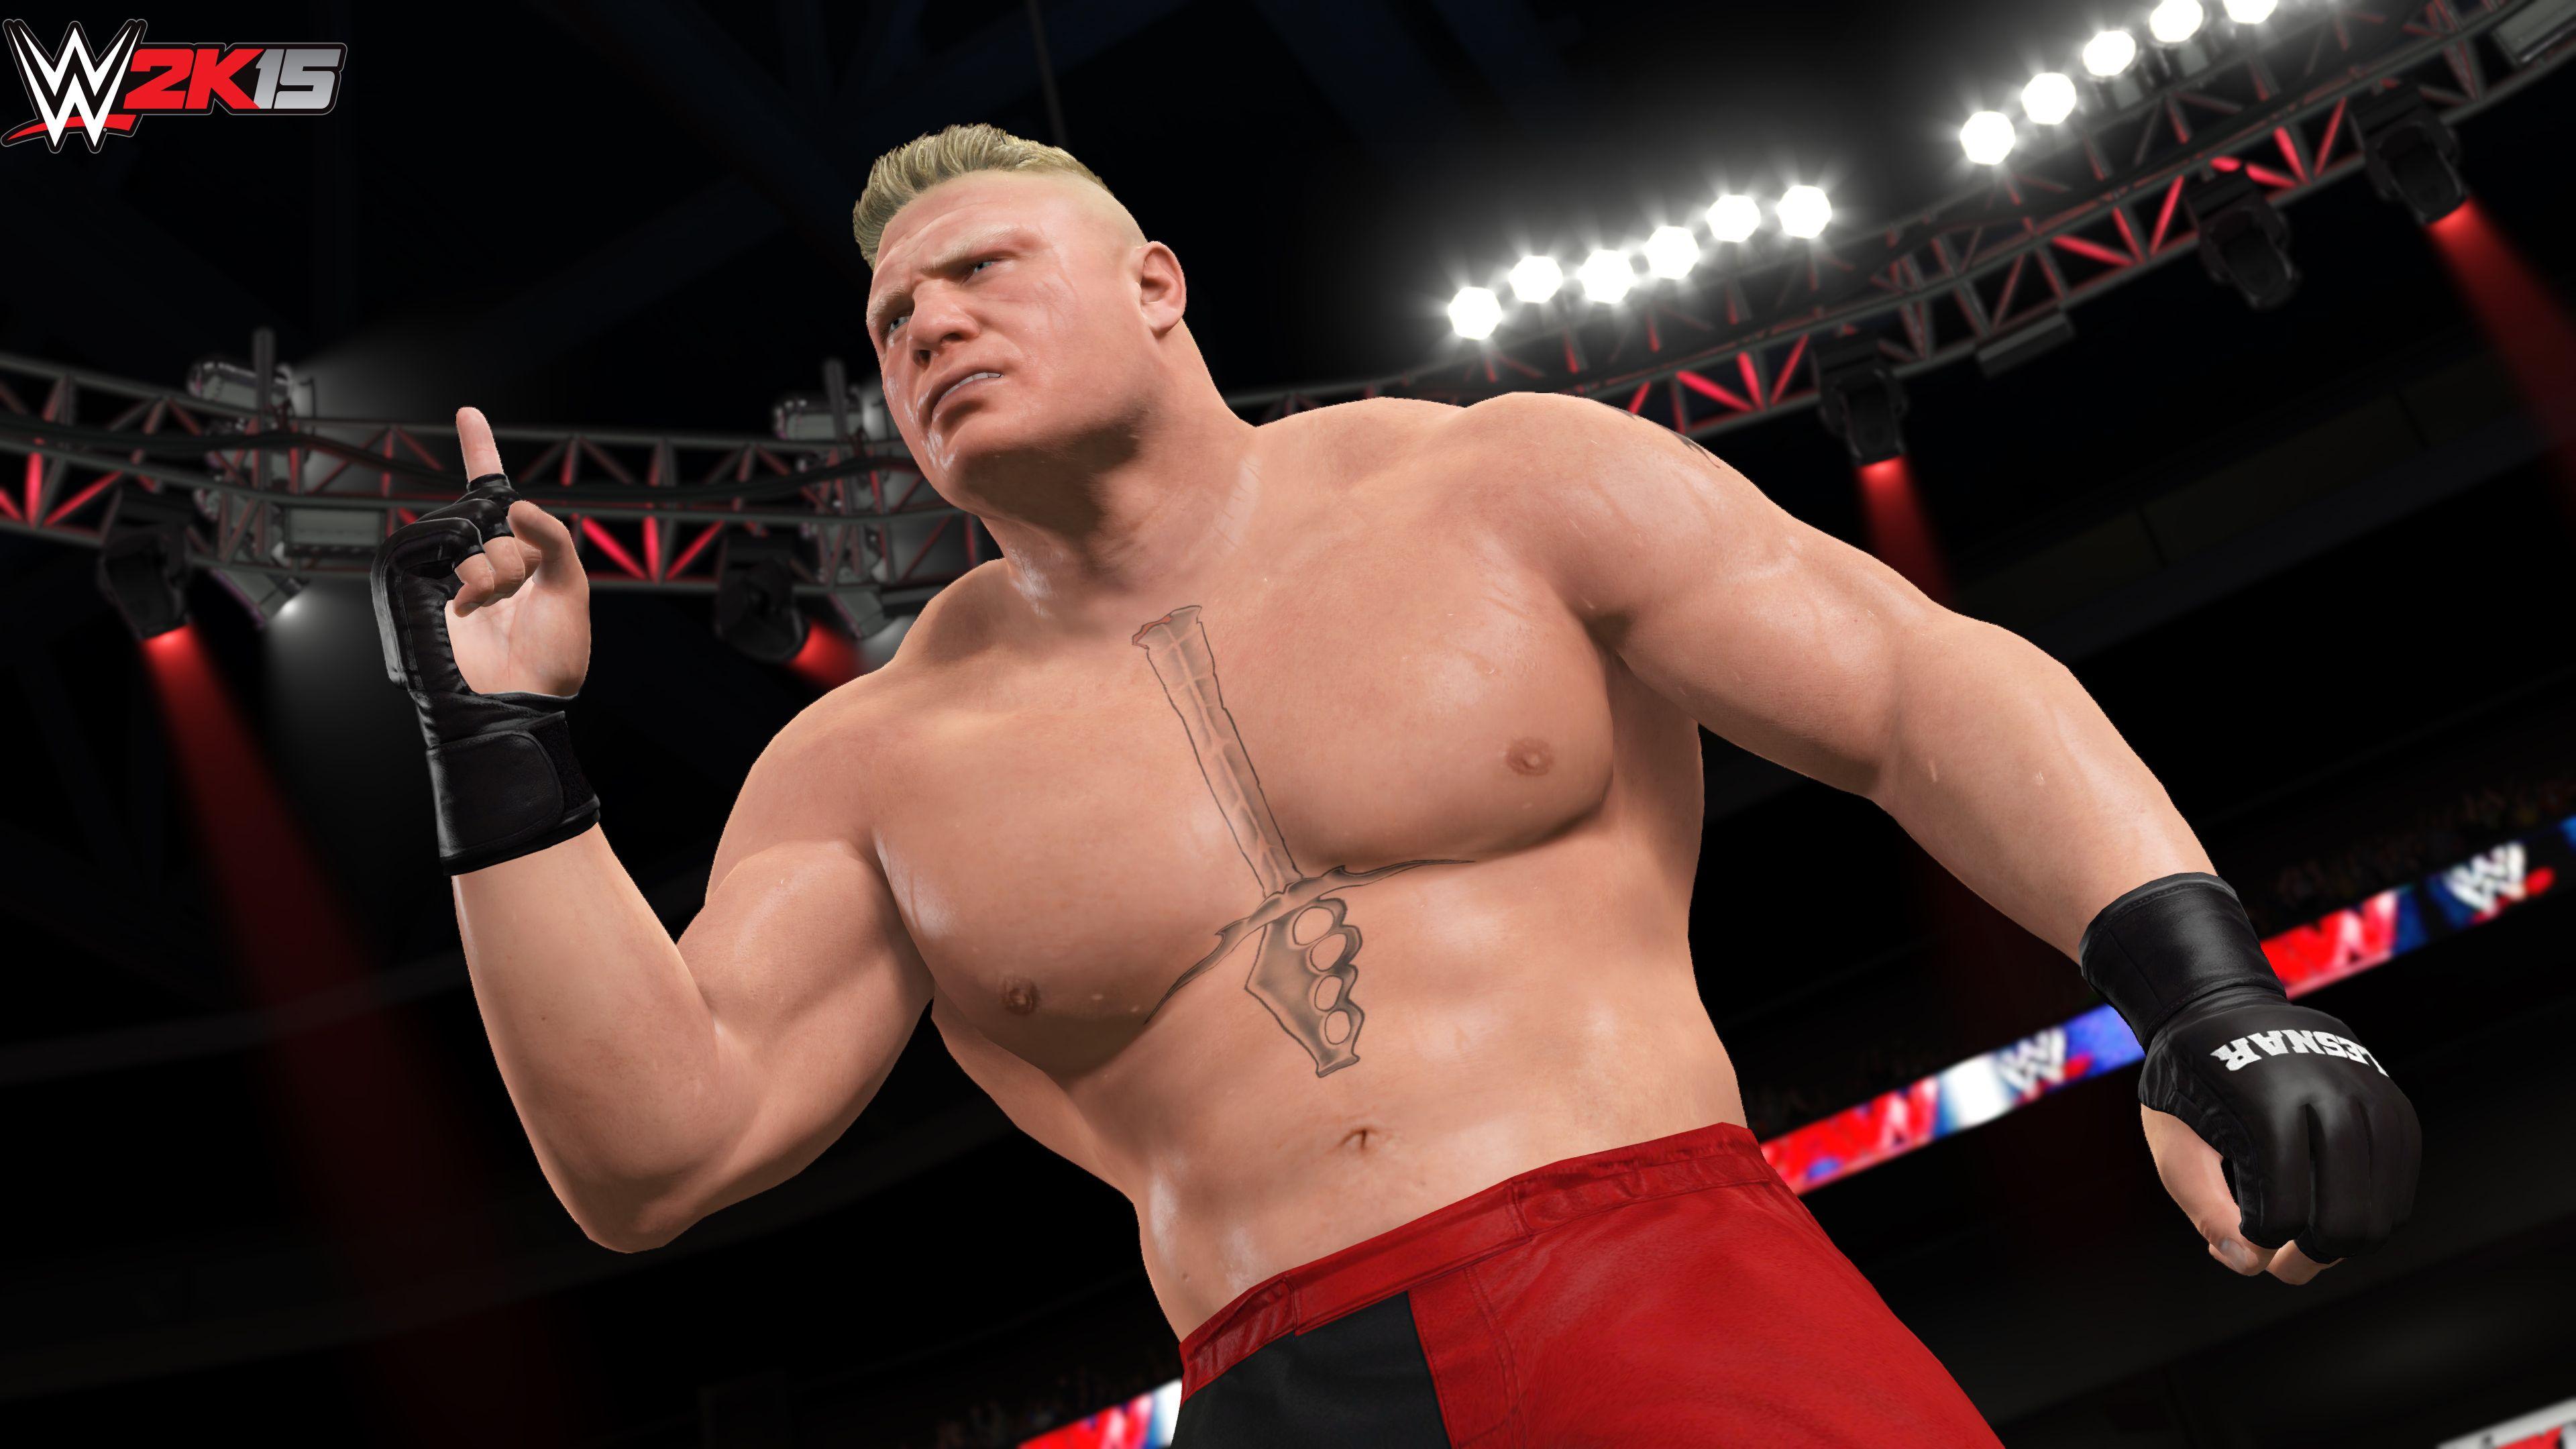 3840x2160px Wide Wwe 2k15 HDQ picture 53